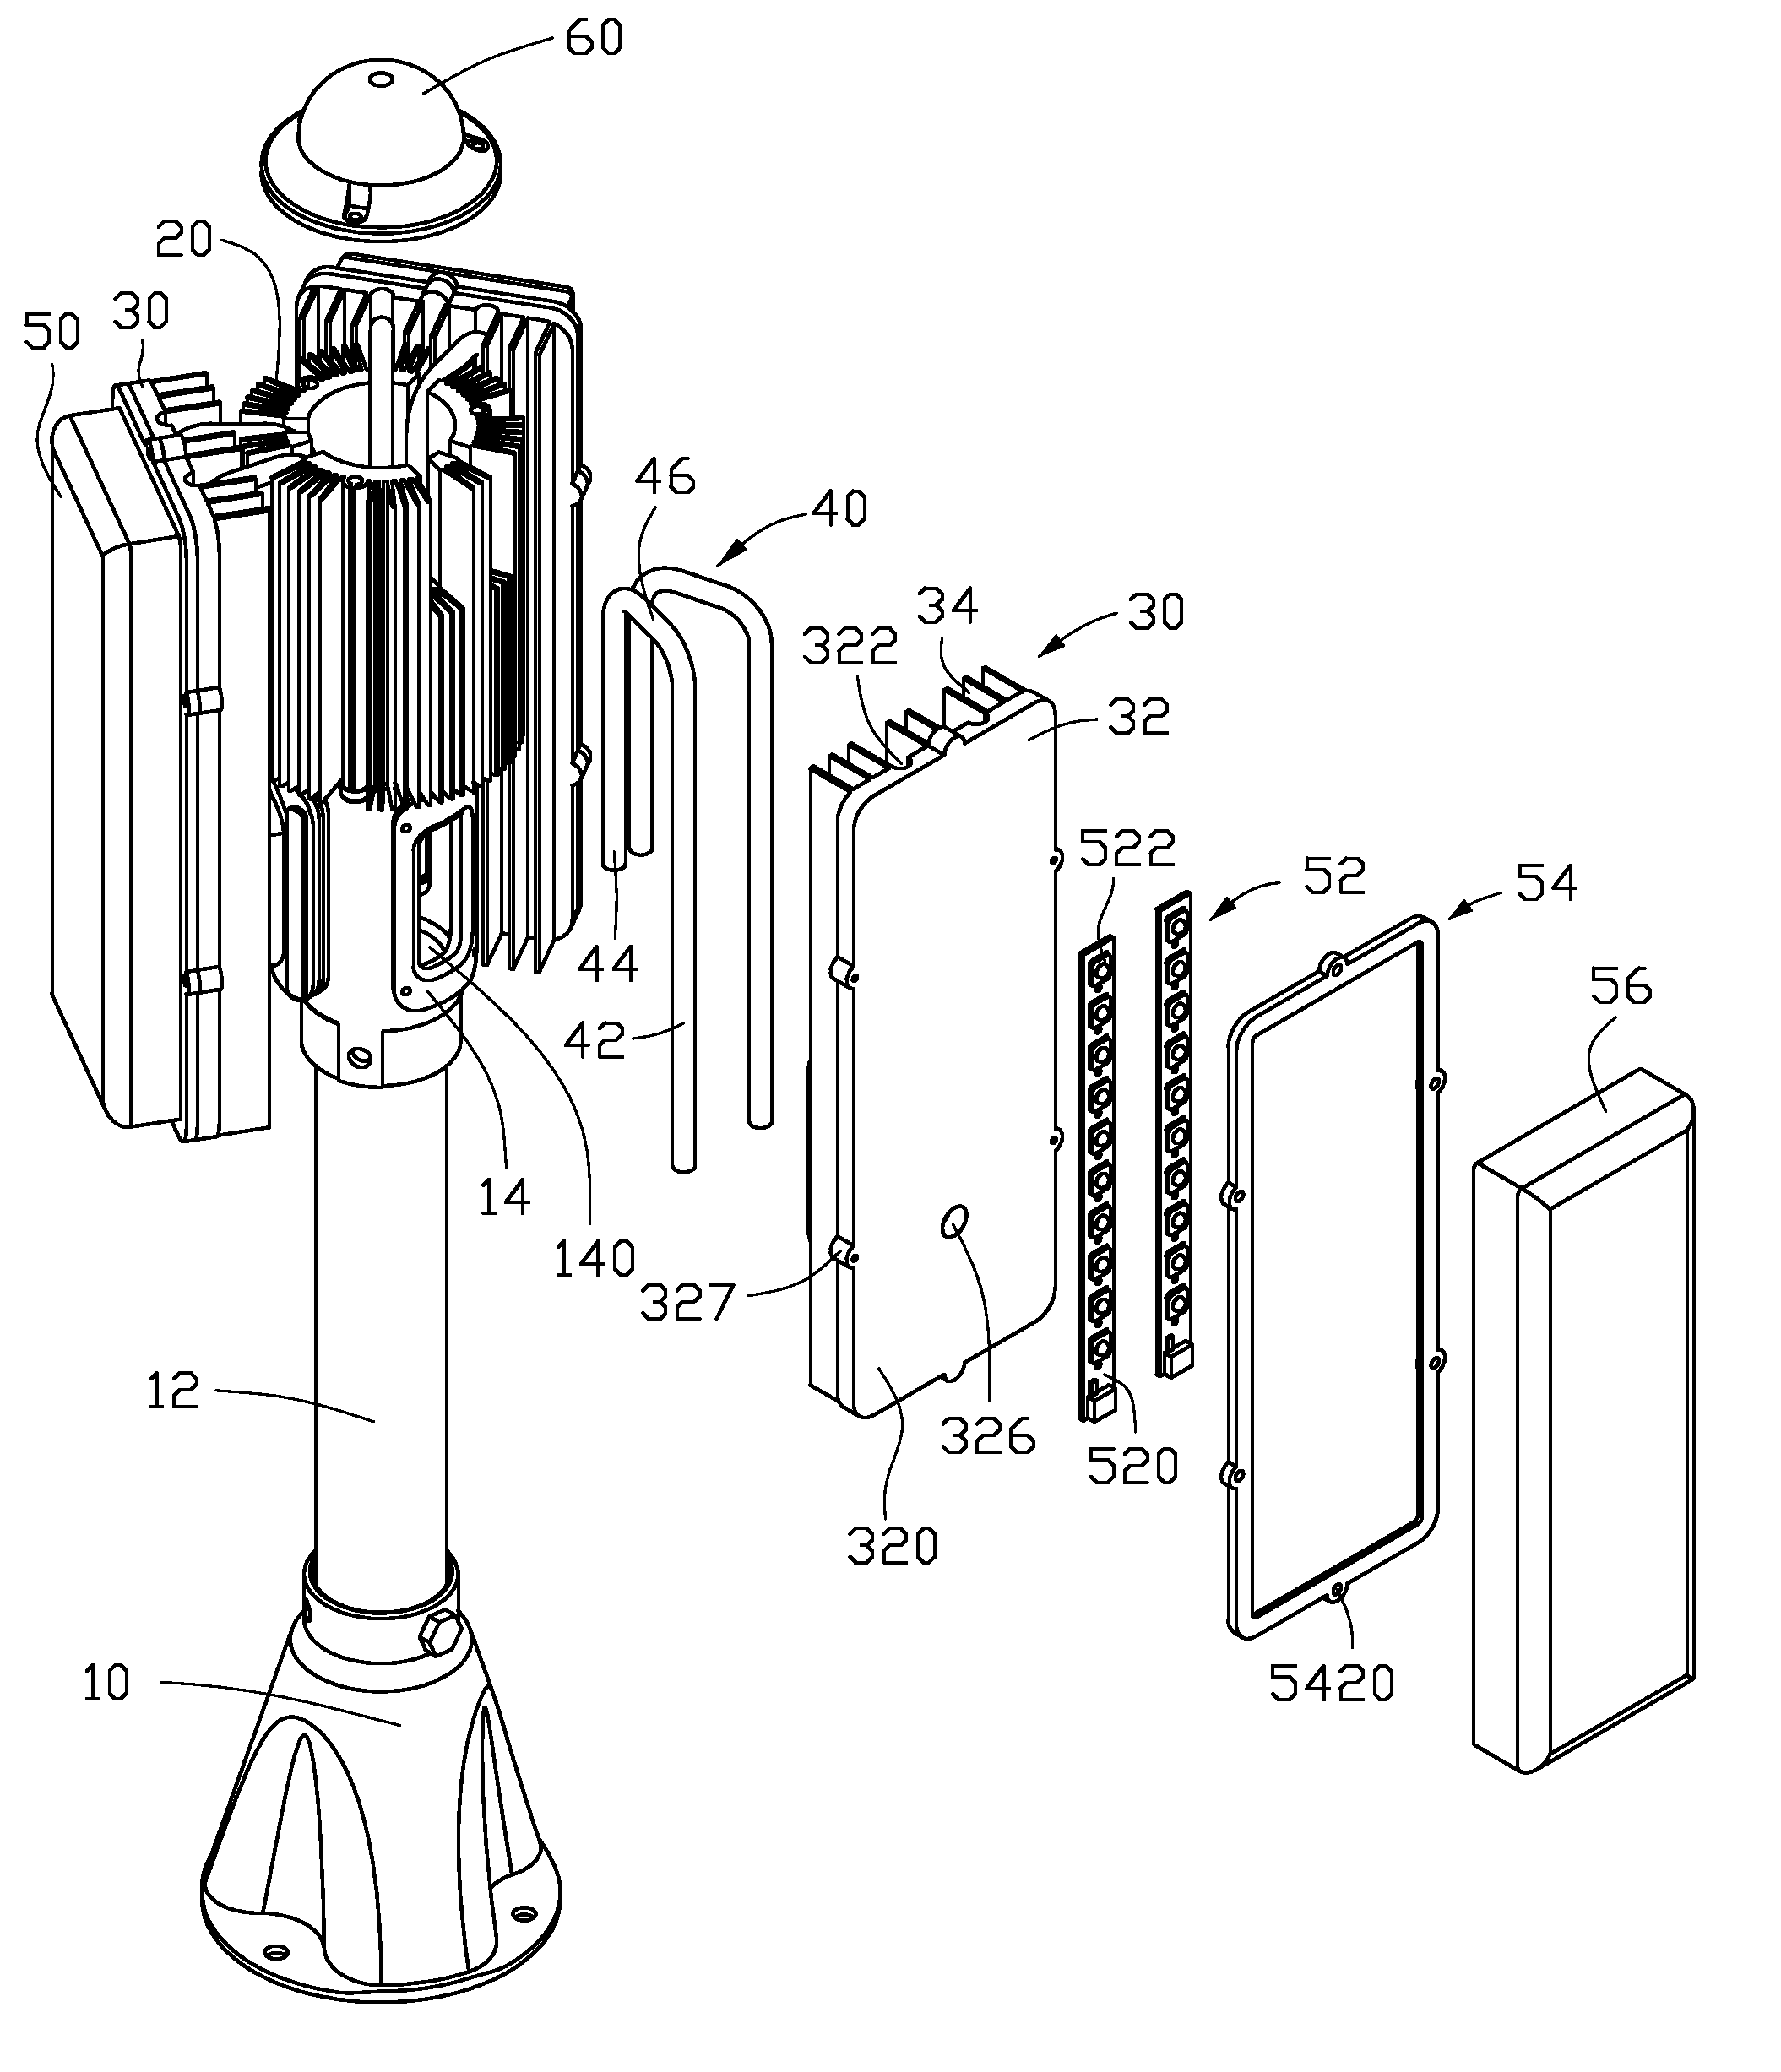 LED lamp assembly having heat pipes and finned heat sinks